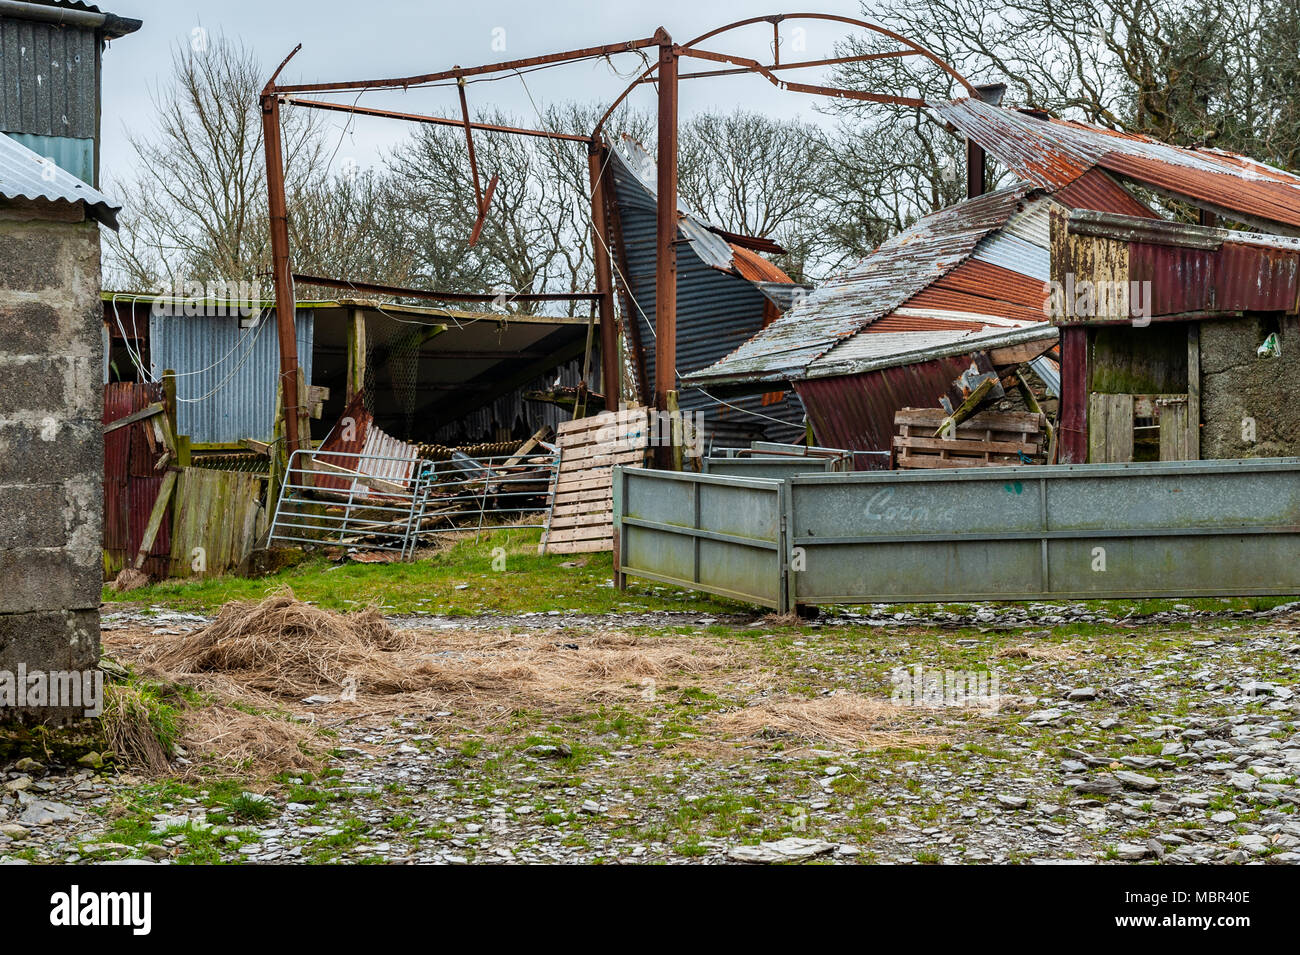 Farm building demolished by high winds in Ballydehob, West Cork, Ireland. Stock Photo